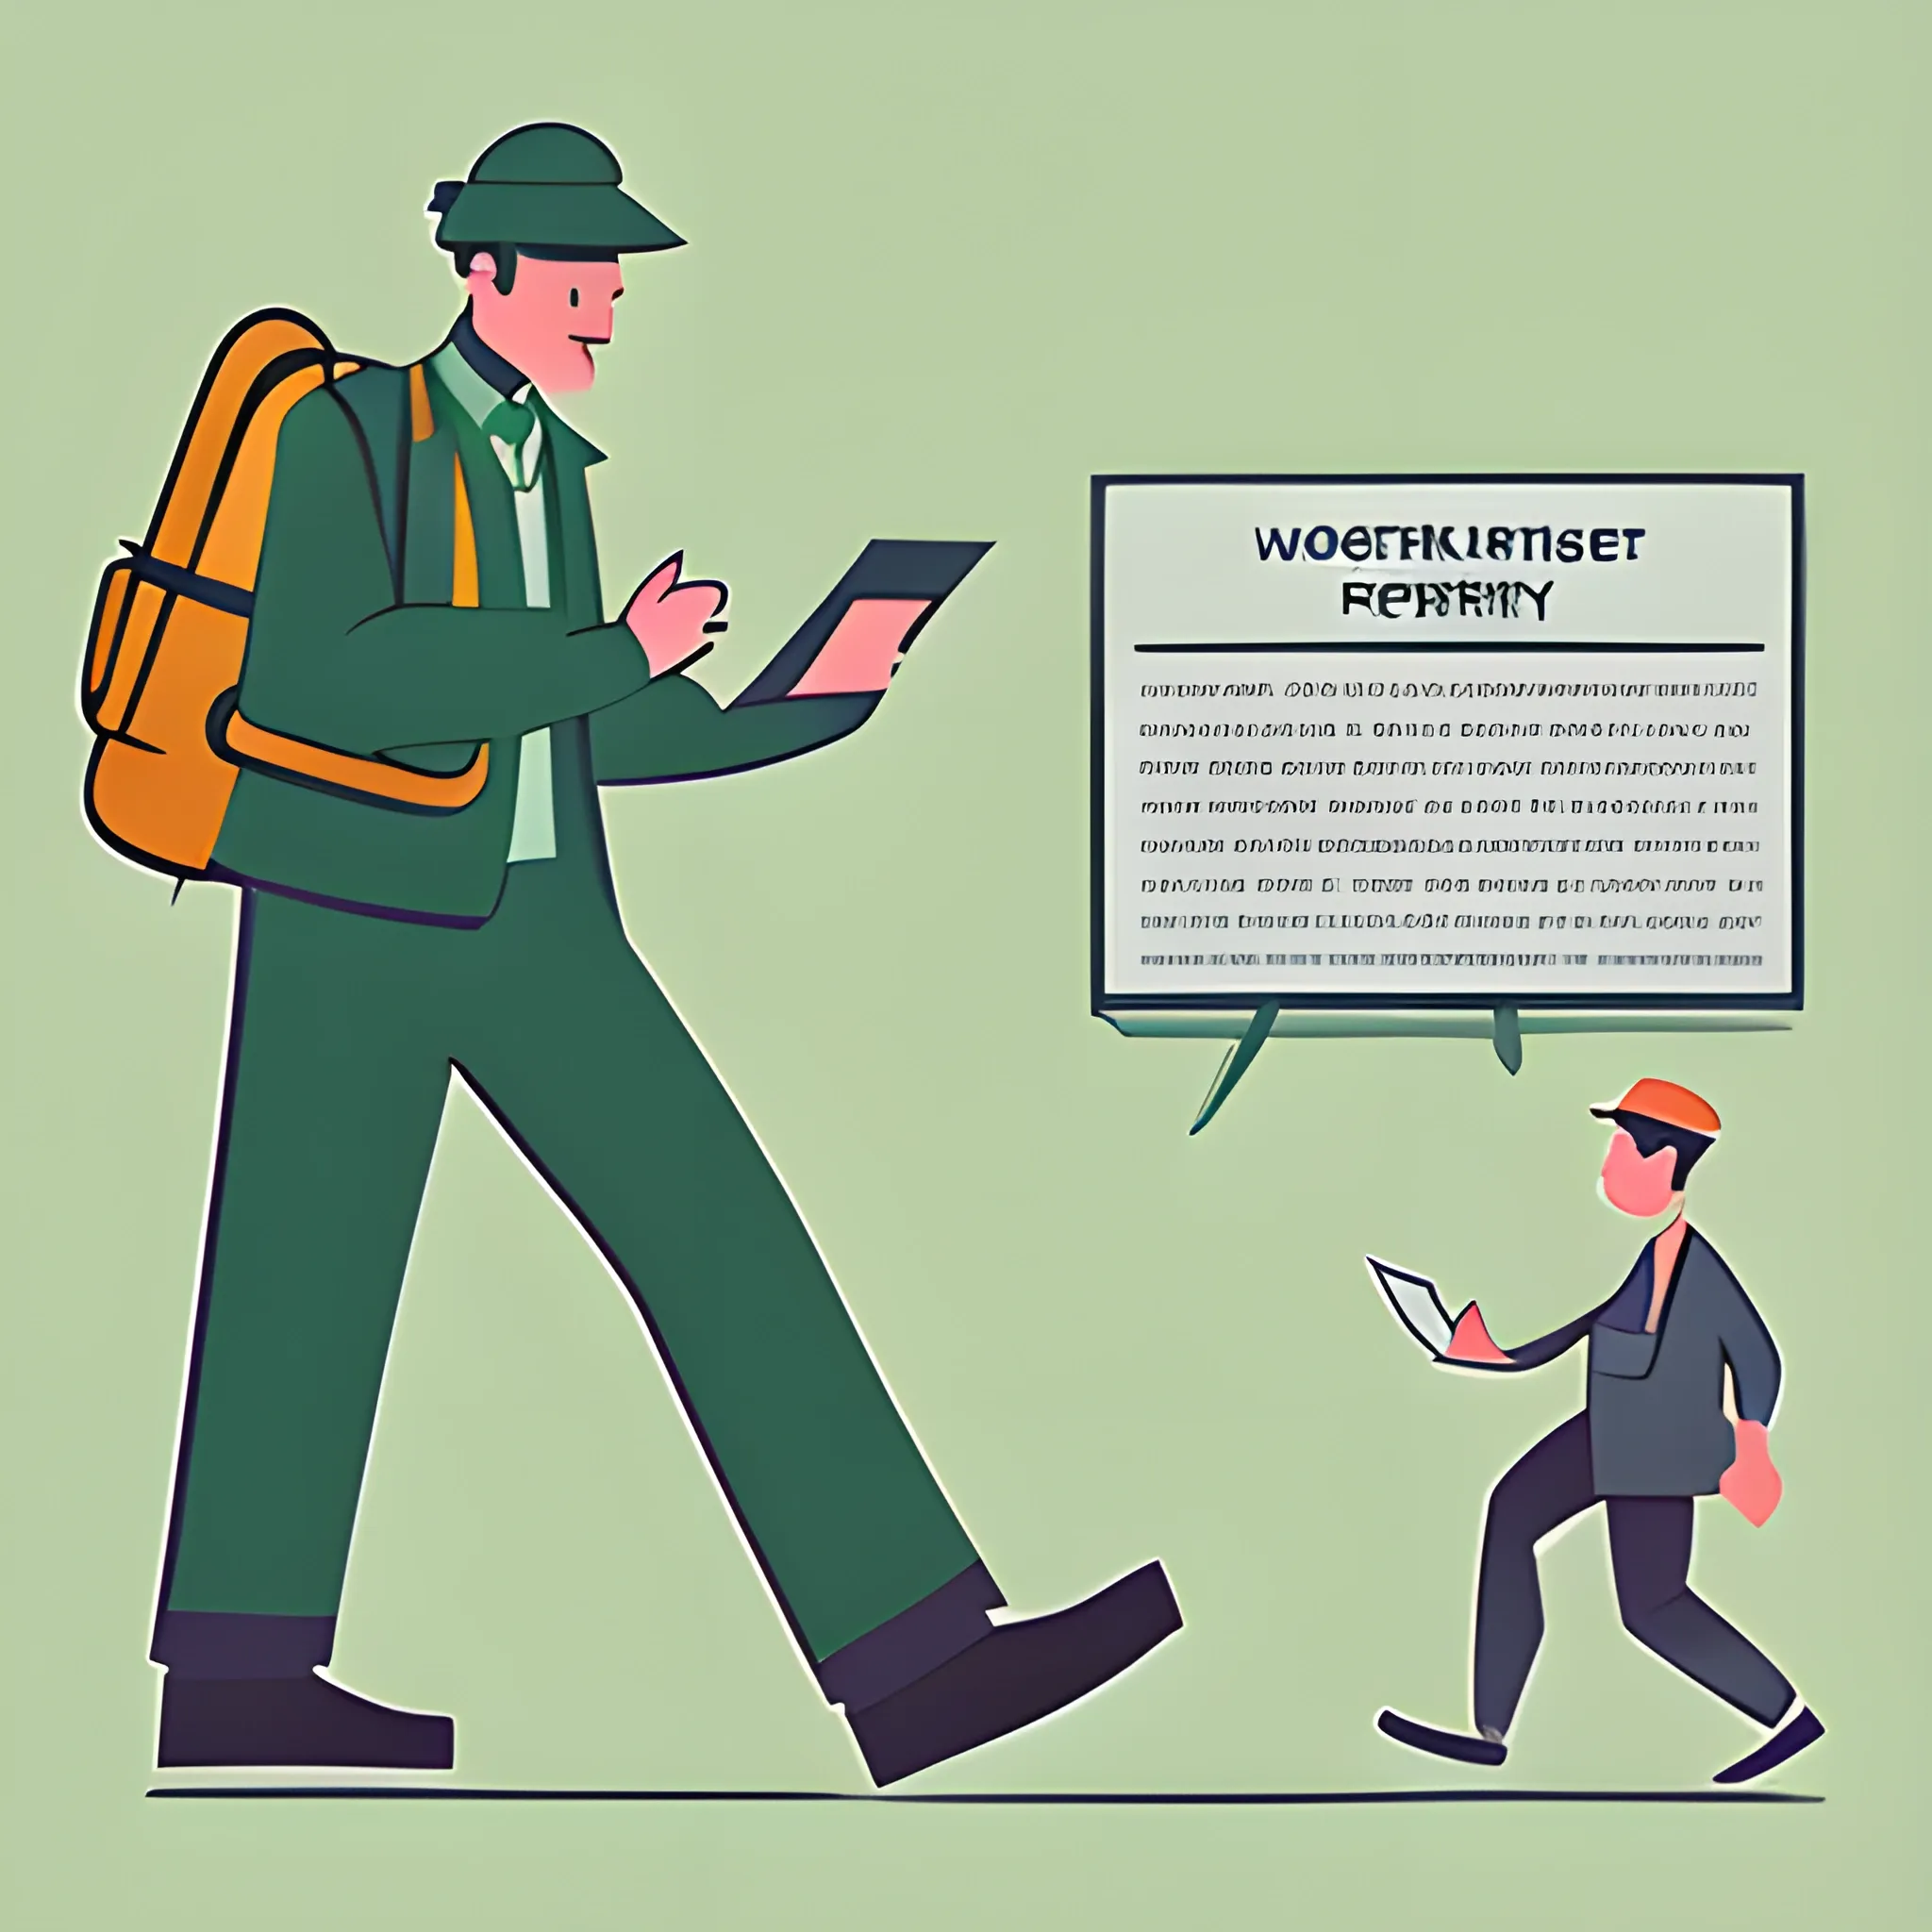 Depict a worker lost in a fog of paperwork, struggling to find a clear path, while a cheerful worker on a sunny, digital path navigates effortlessly with the help of notifications and automated processes. Use contrasting tones of muted grays for the traditional setting and lively greens for the digital environment.
, Cartoon